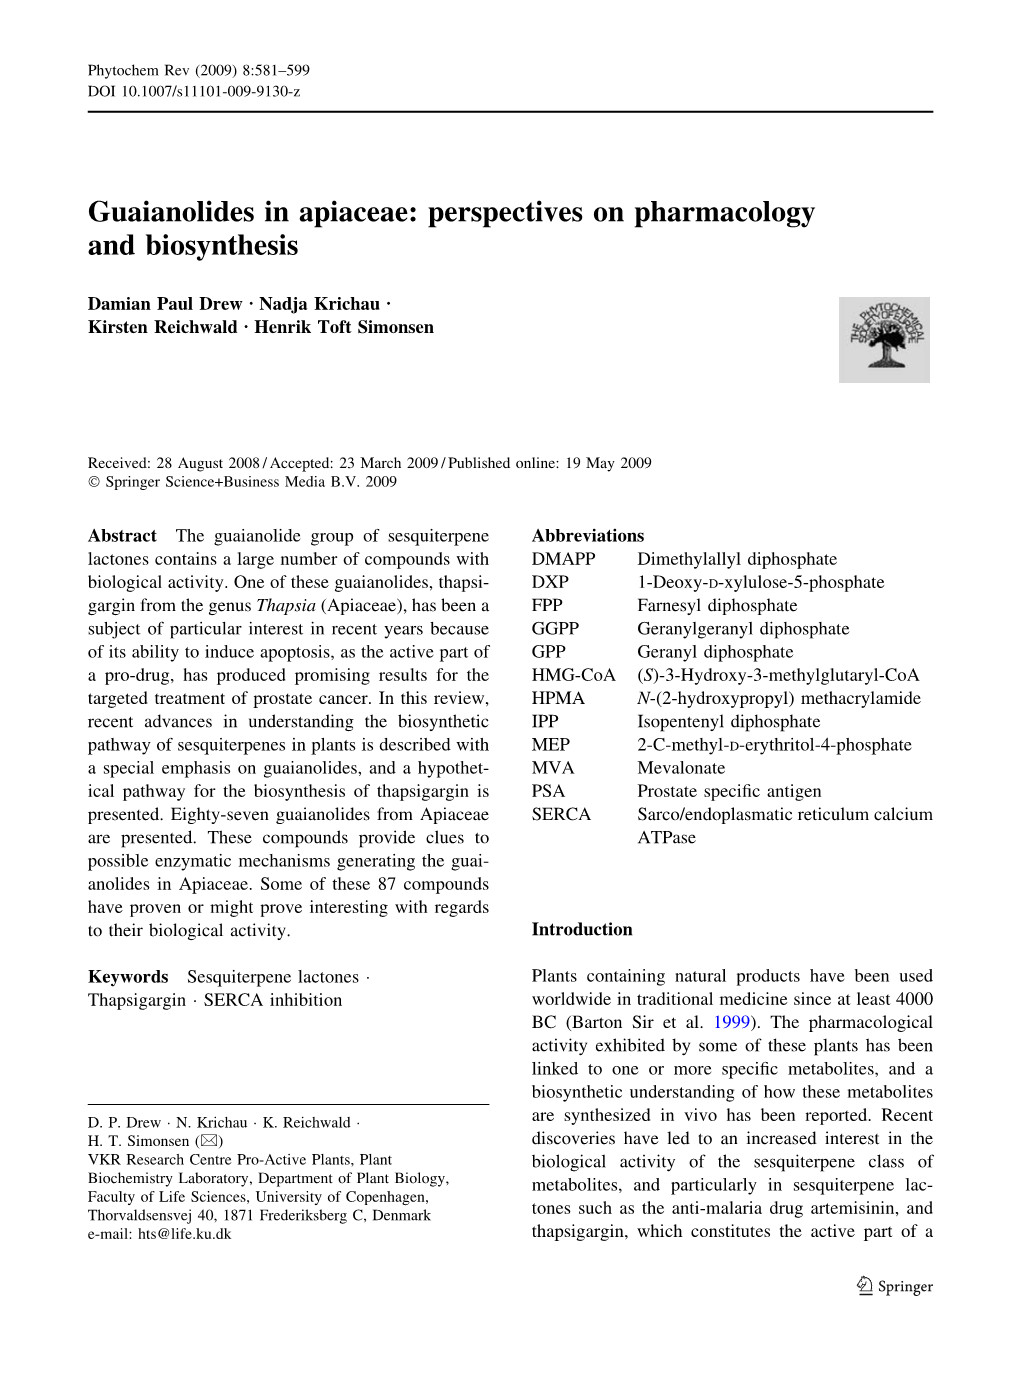 Guaianolides in Apiaceae: Perspectives on Pharmacology and Biosynthesis